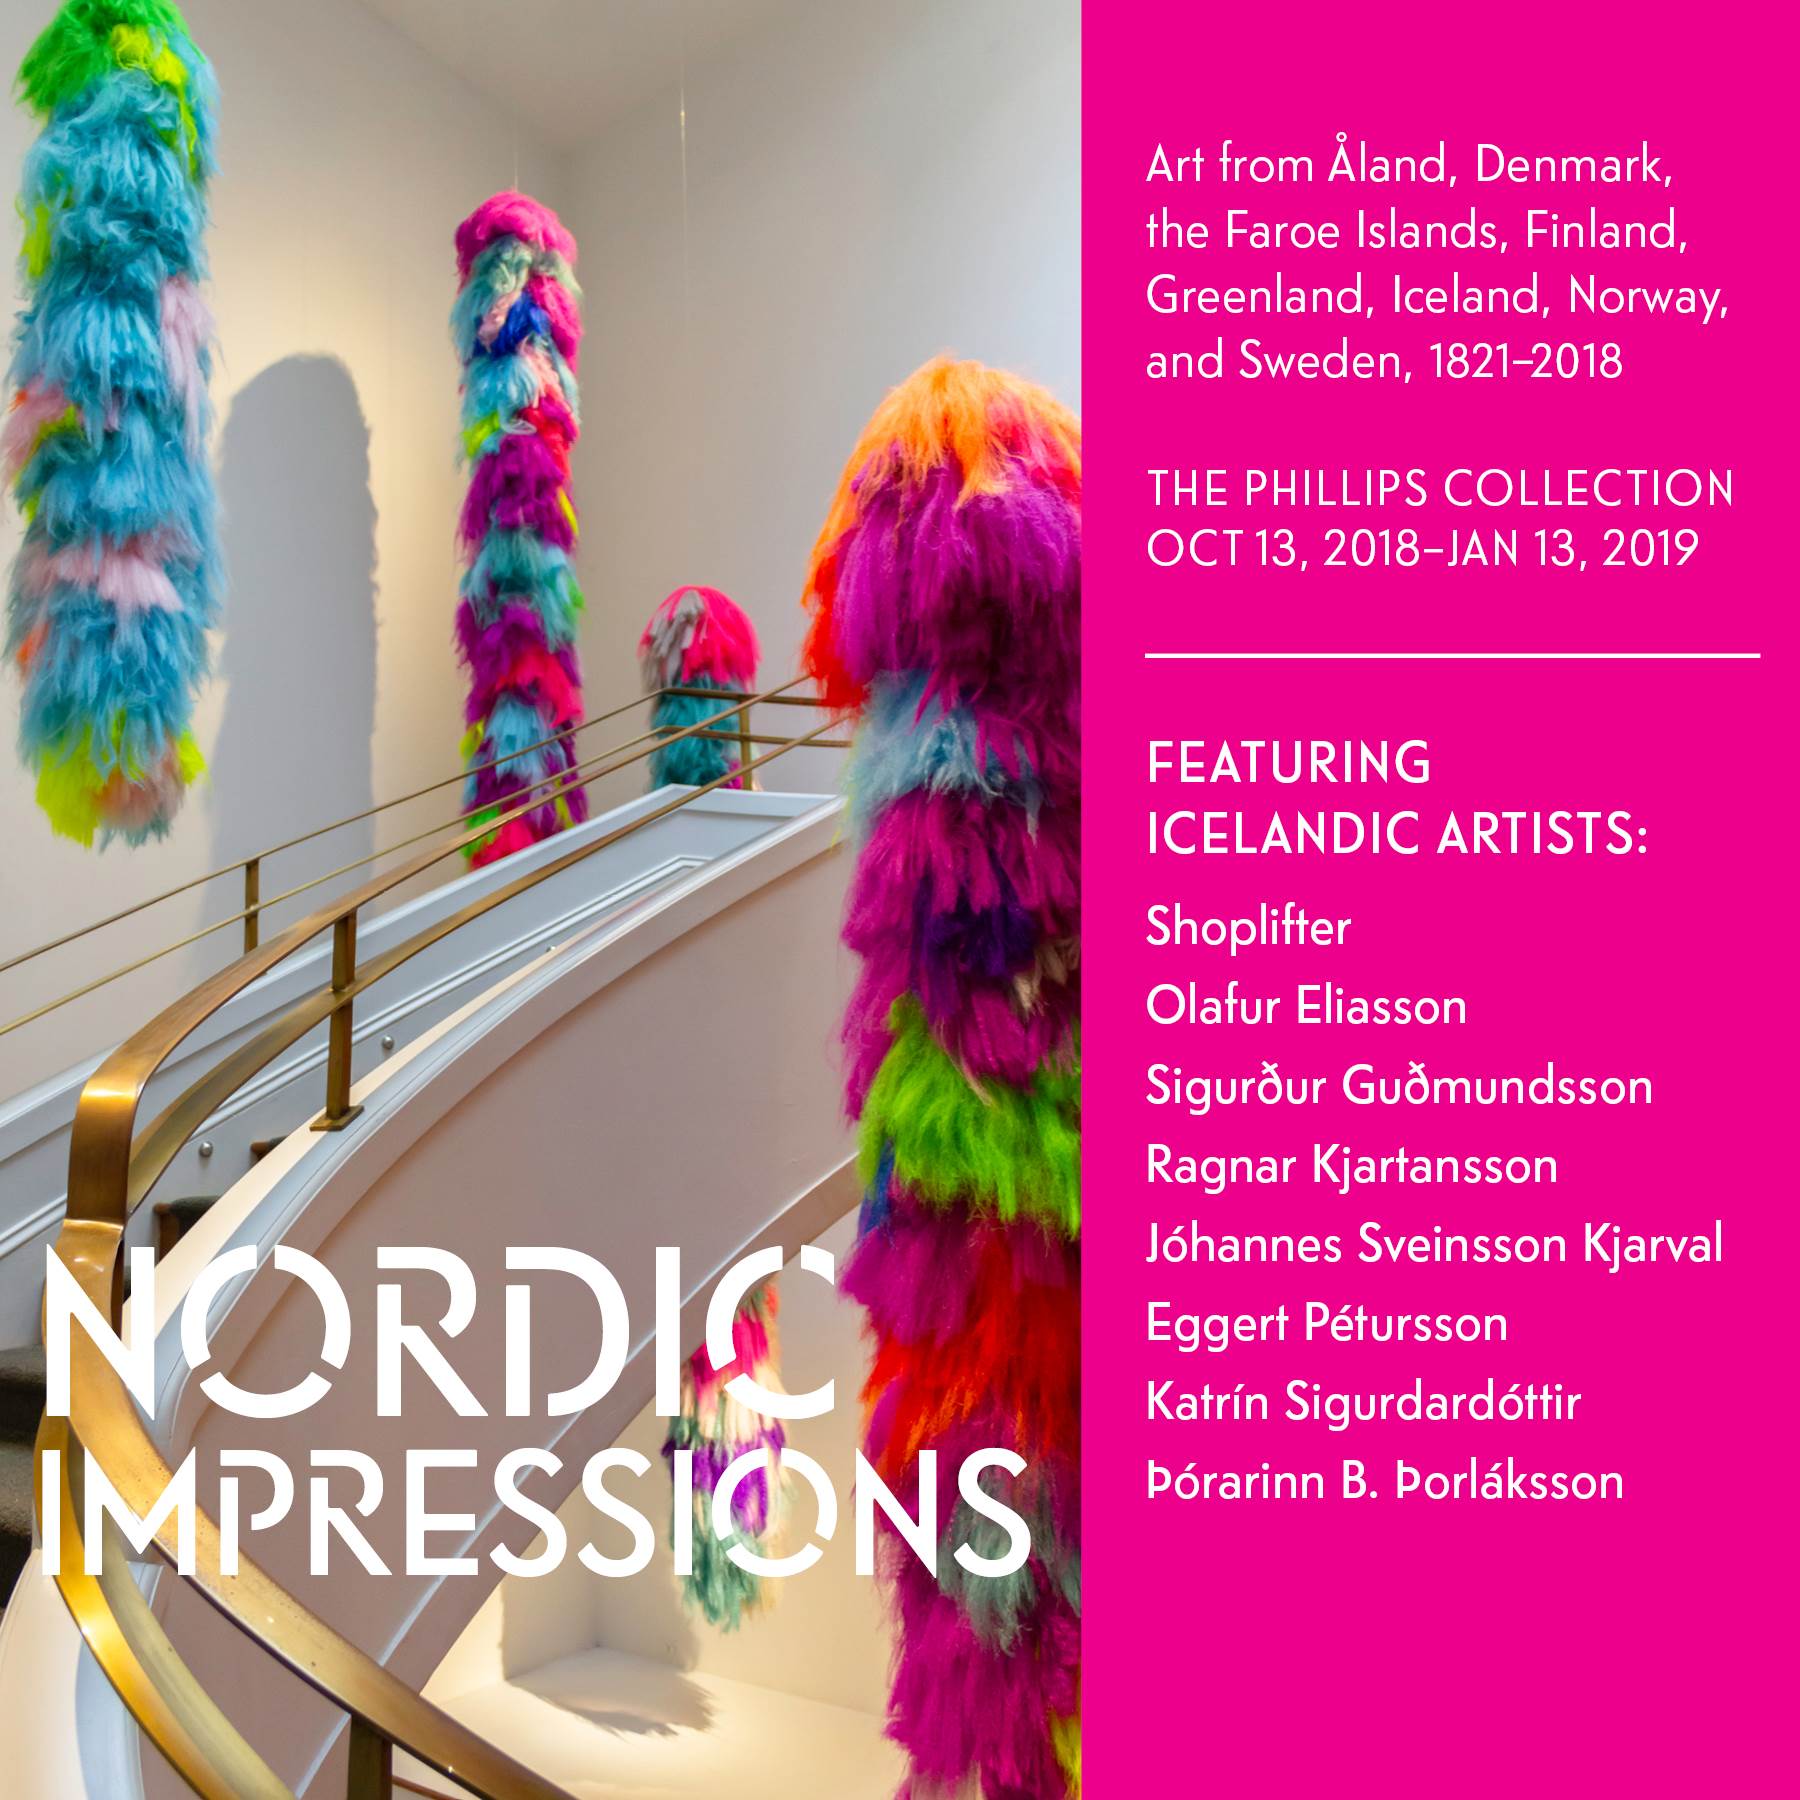 Nordic Impressions exhibition in the Phillips Collection from 13 October to 13 January 2019 - mynd